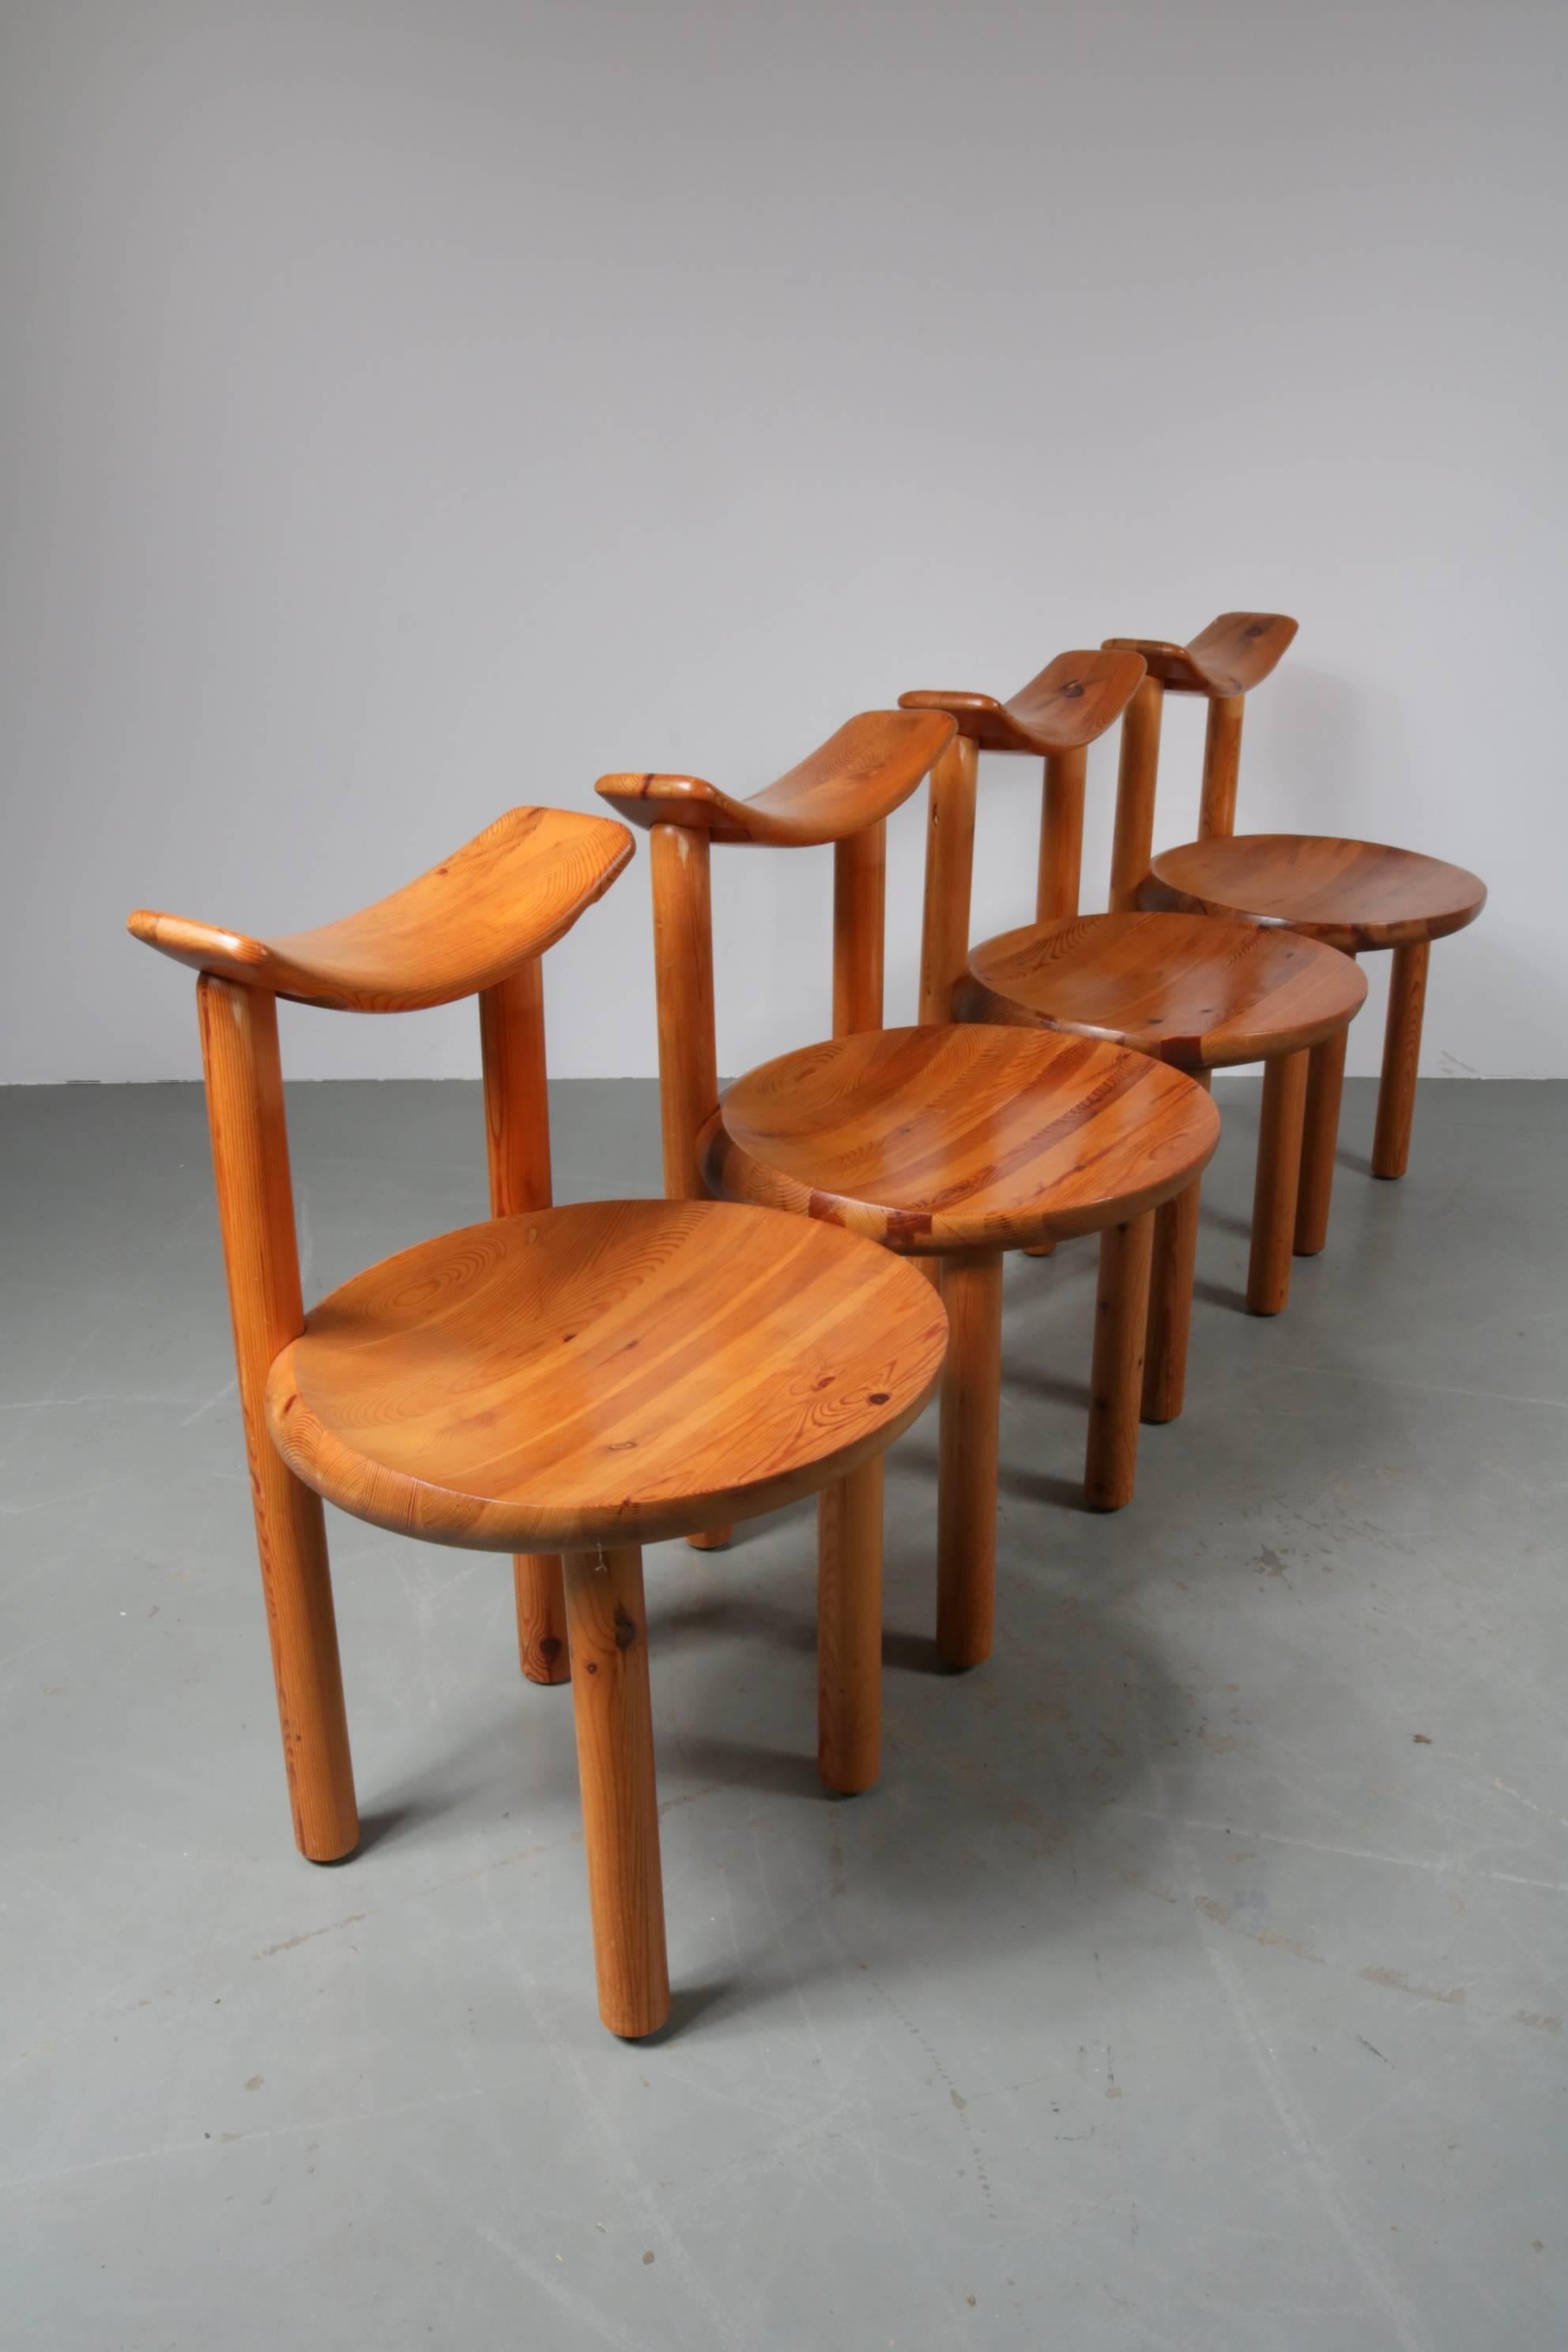 Amazing set of four dining chairs designed by Rainer Daumiller, manufactured by Hirtshals Sawmill in Denmark, circa 1970.

This impressive set contains four dining chairs, made in the highest quality solid pinewood in the natural rich brown /